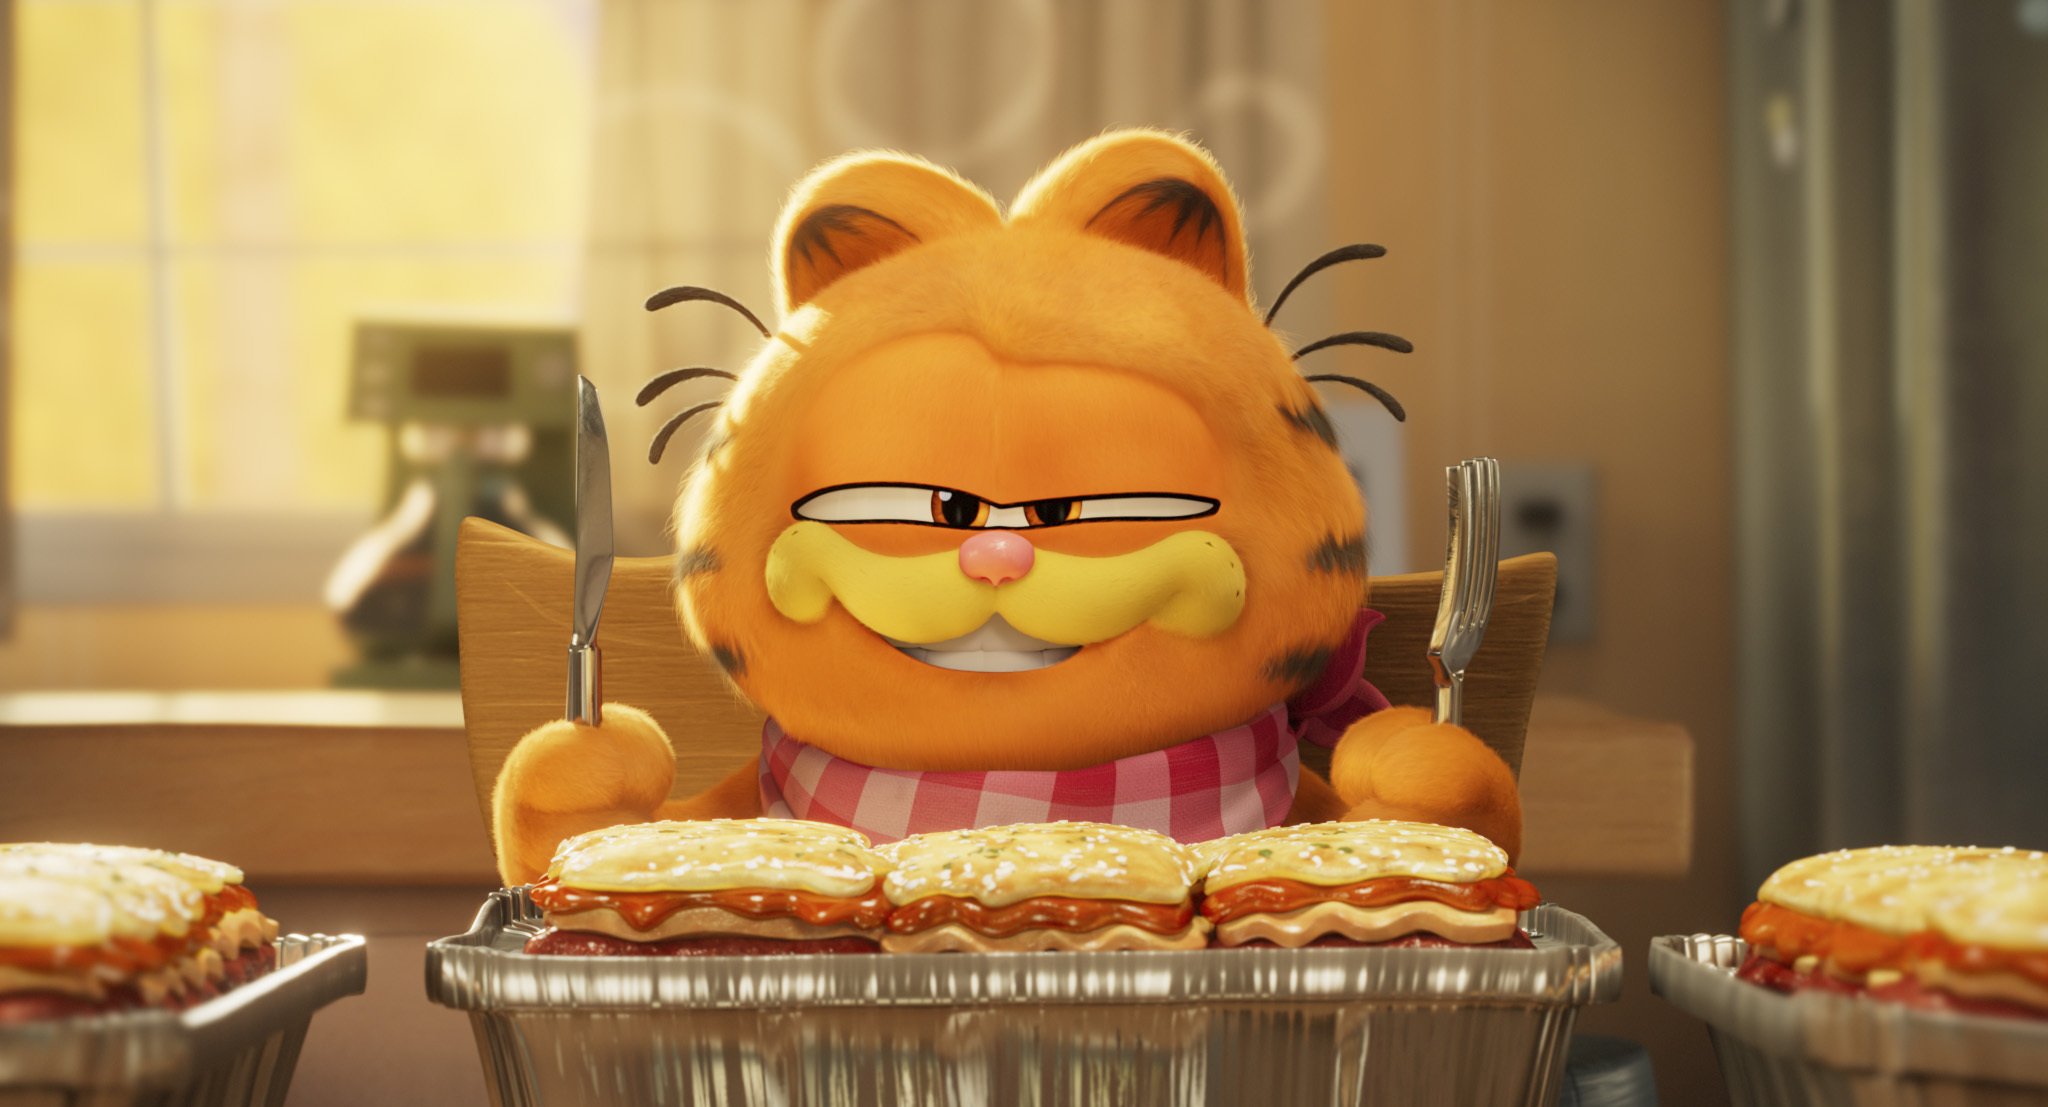 The Garfield movie is a disappointingly unremarkable adaptation of a much-loved cartoon creation